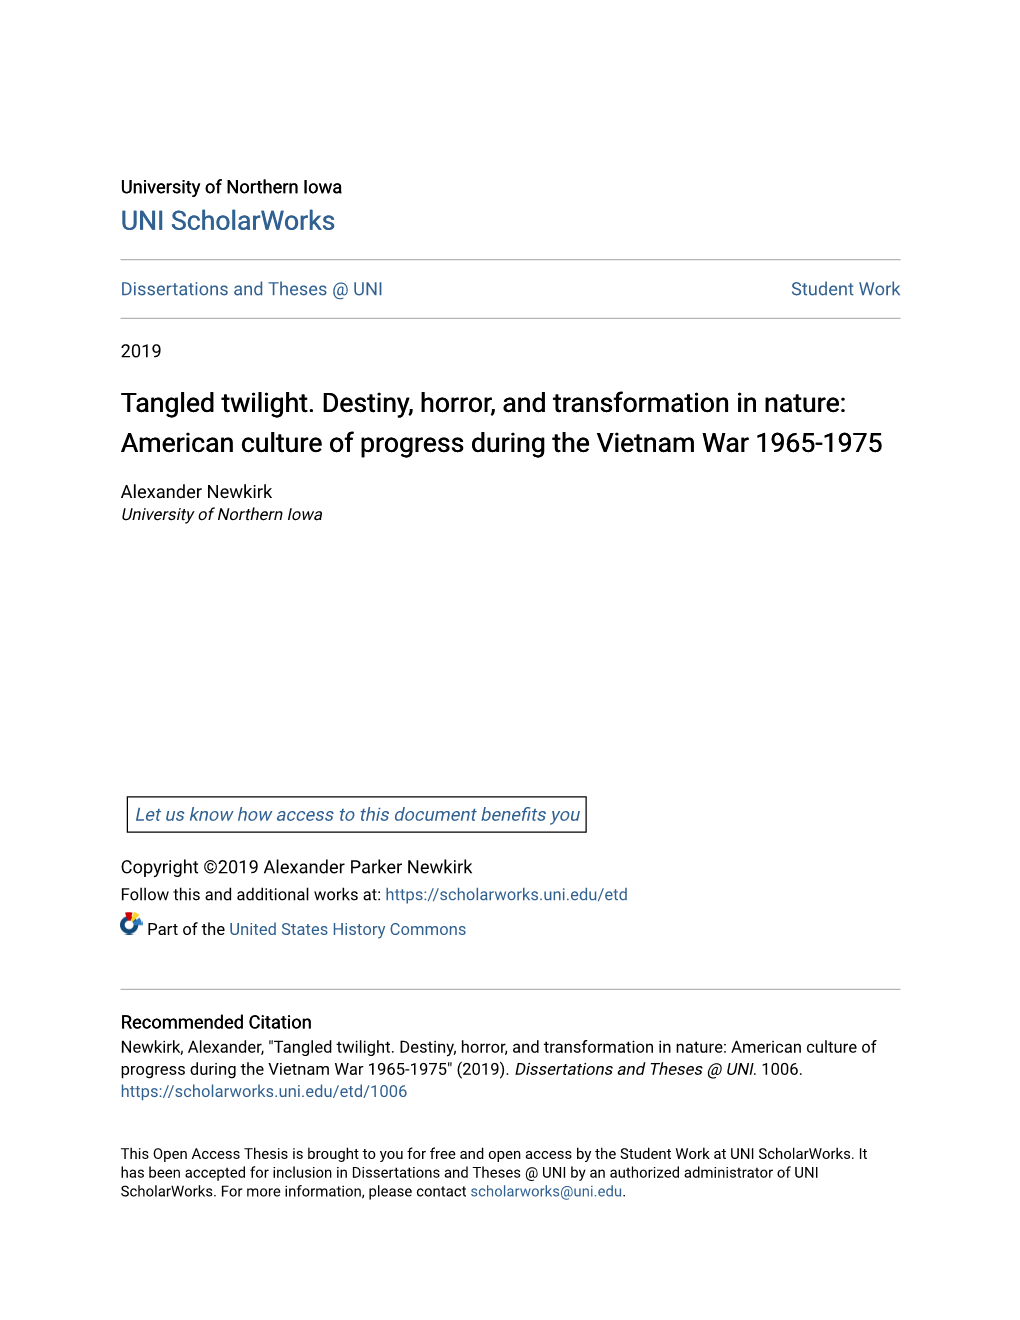 Tangled Twilight. Destiny, Horror, and Transformation in Nature: American Culture of Progress During the Vietnam War 1965-1975